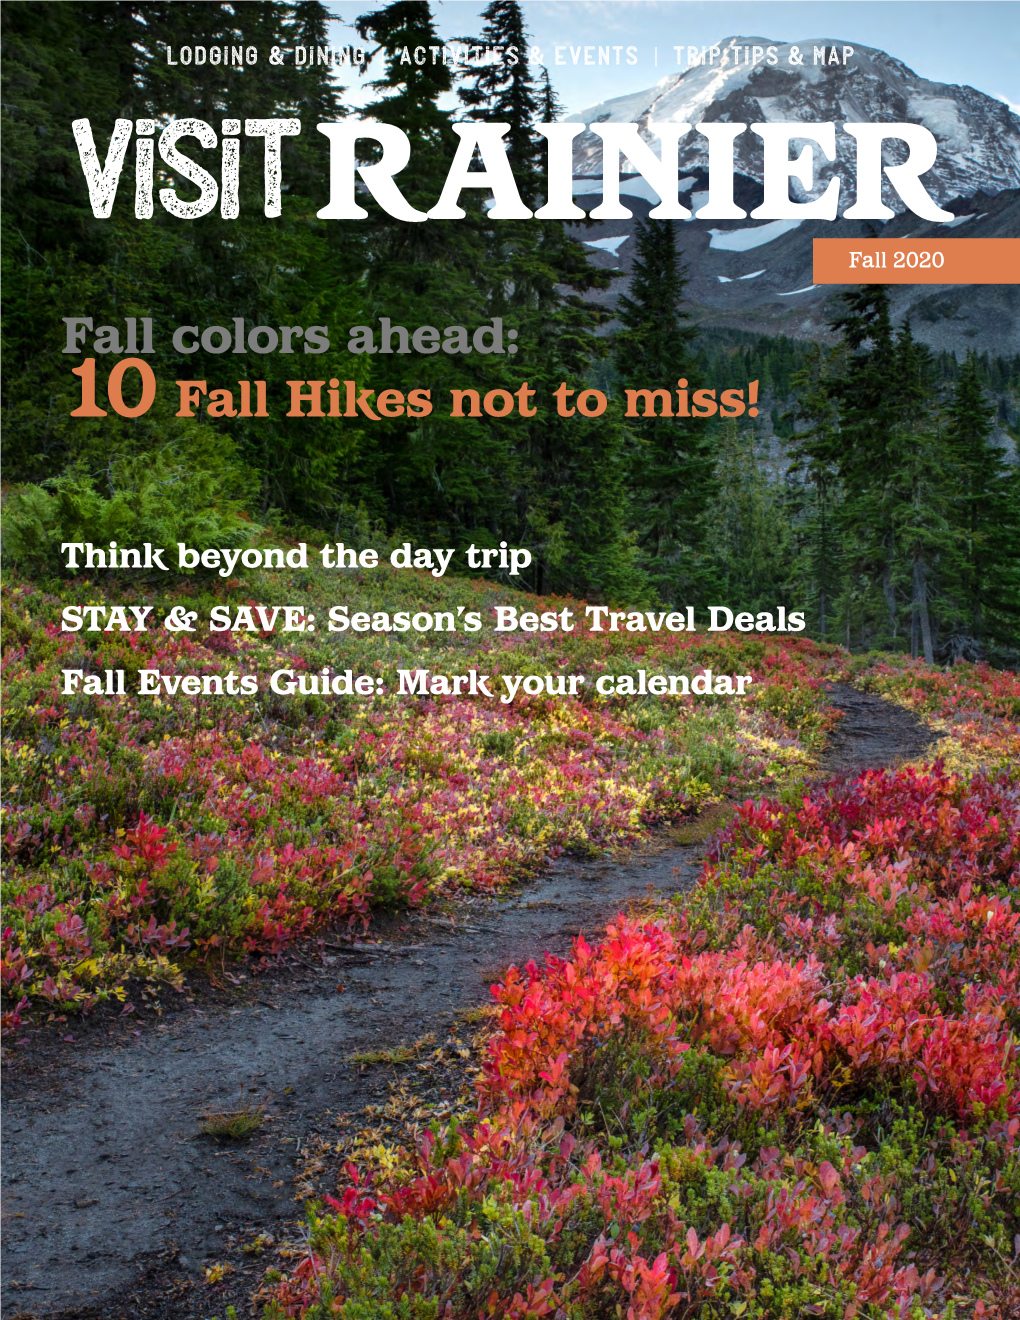 Fall Colors Ahead: 10 Fall Hikes Not to Miss!